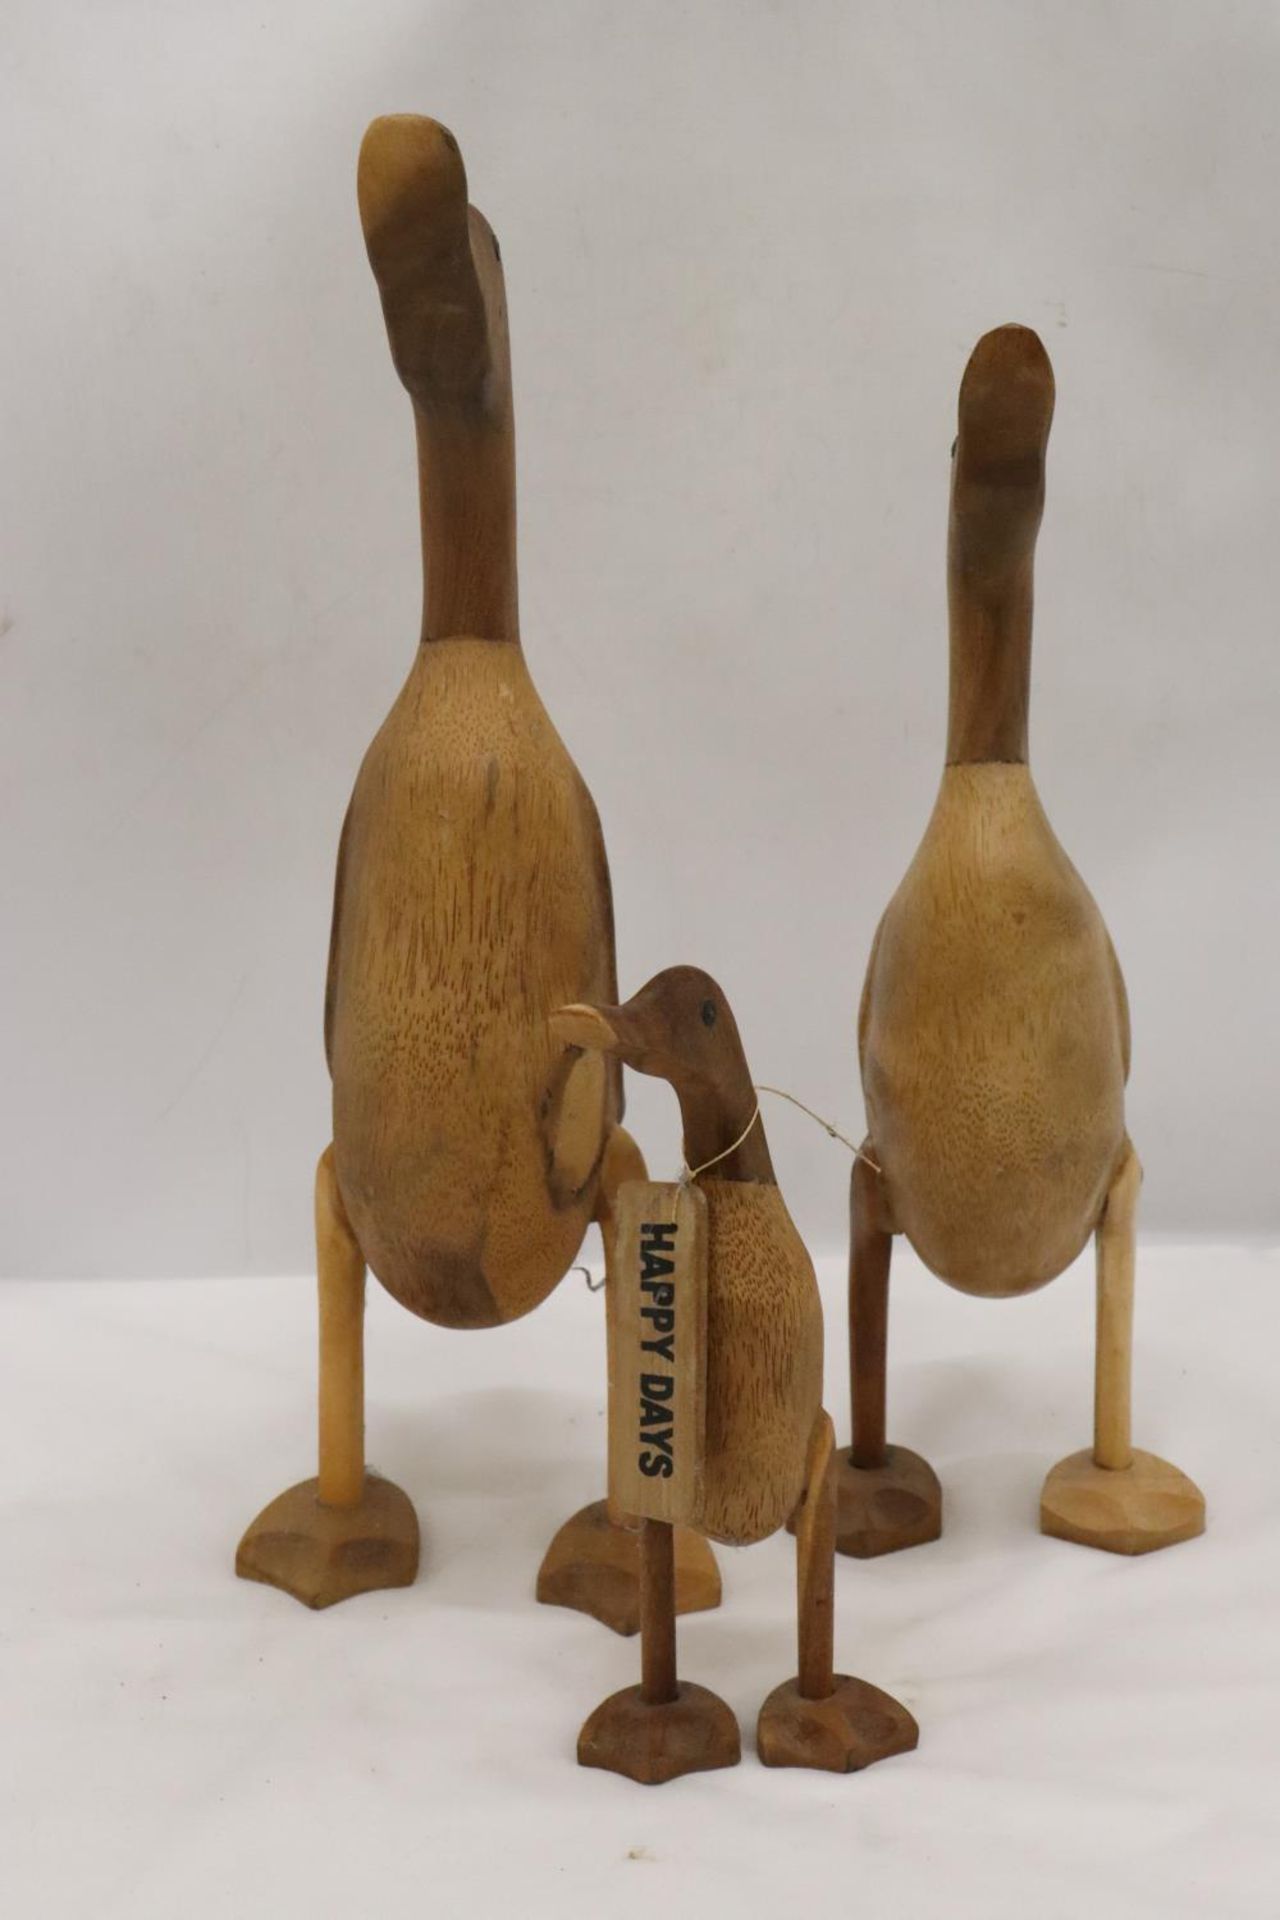 A WOODEN DUCK FAMILY TO INCLUDE DADDY DUCK, MUMMY DUCK AND BABY DUCK